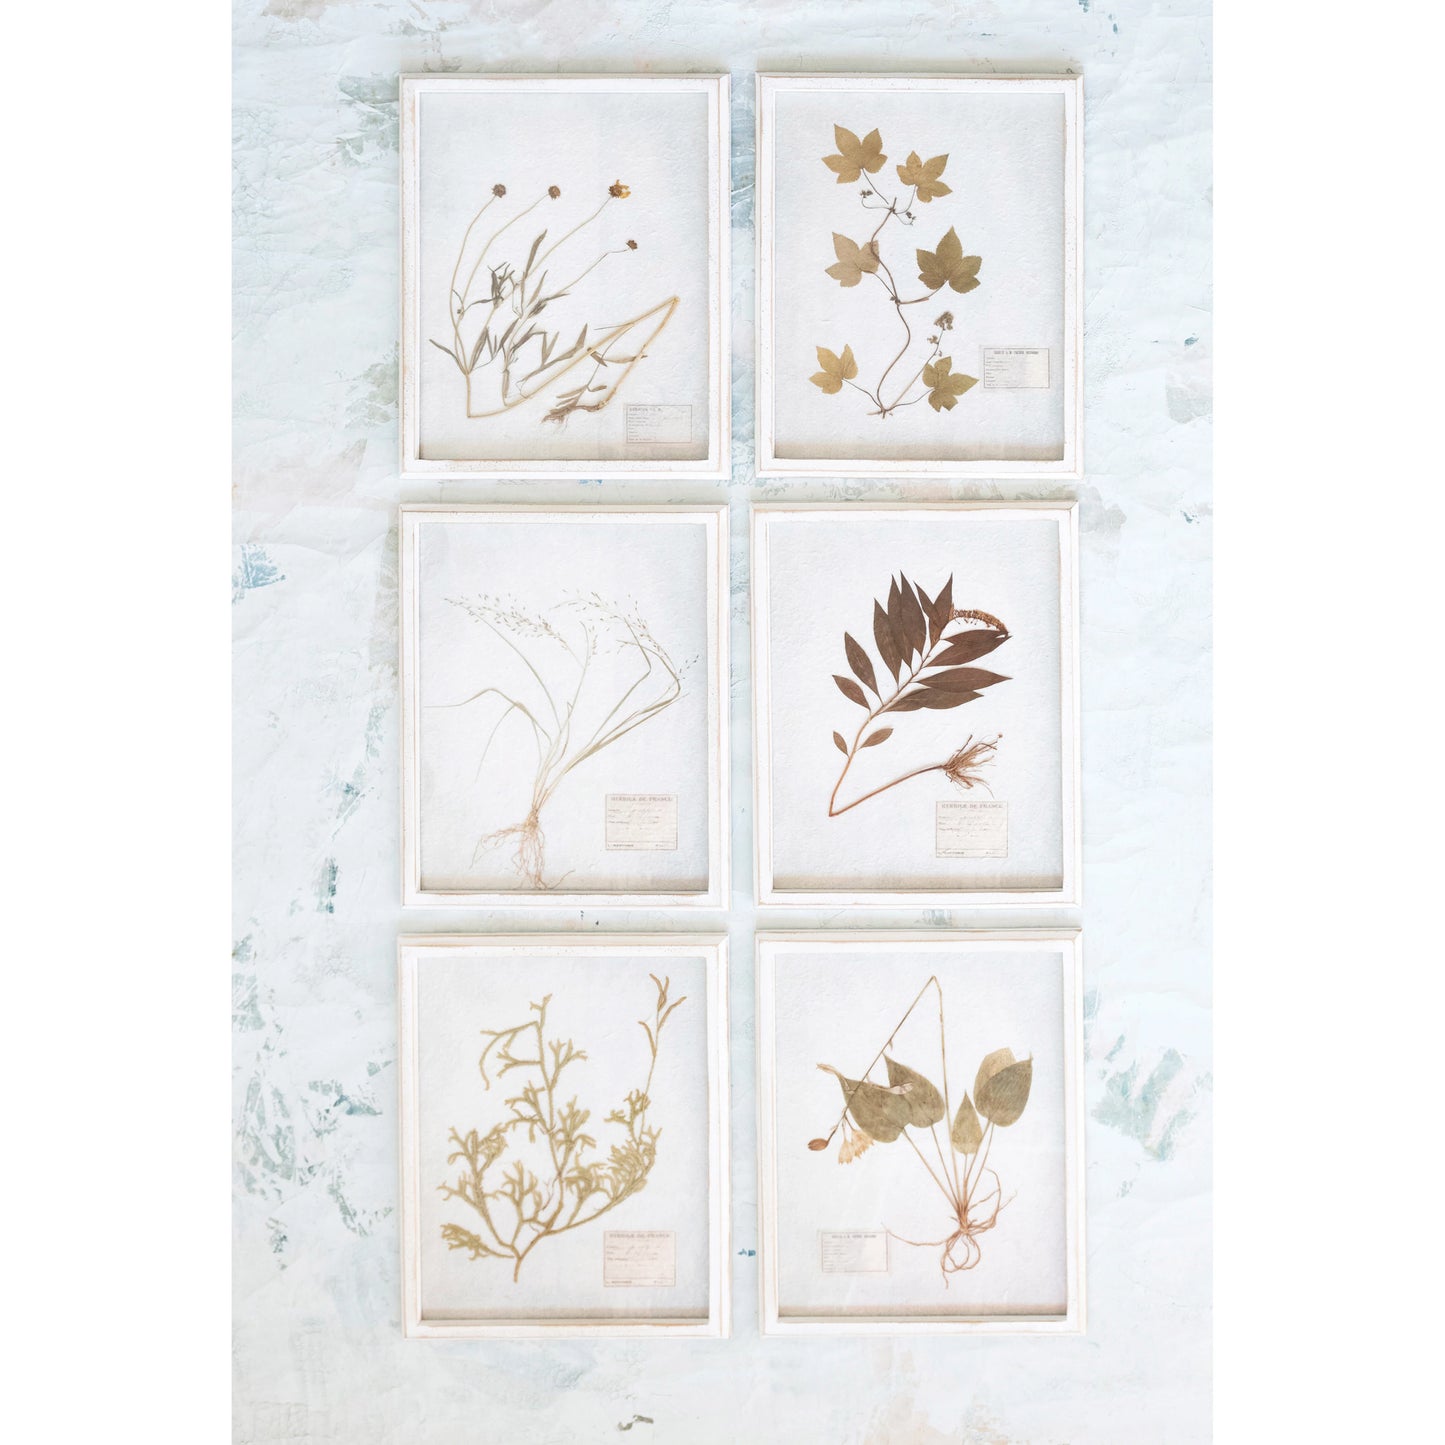 Wood Framed Glass Wall Décor with Dried Botanicals, 6 Styles